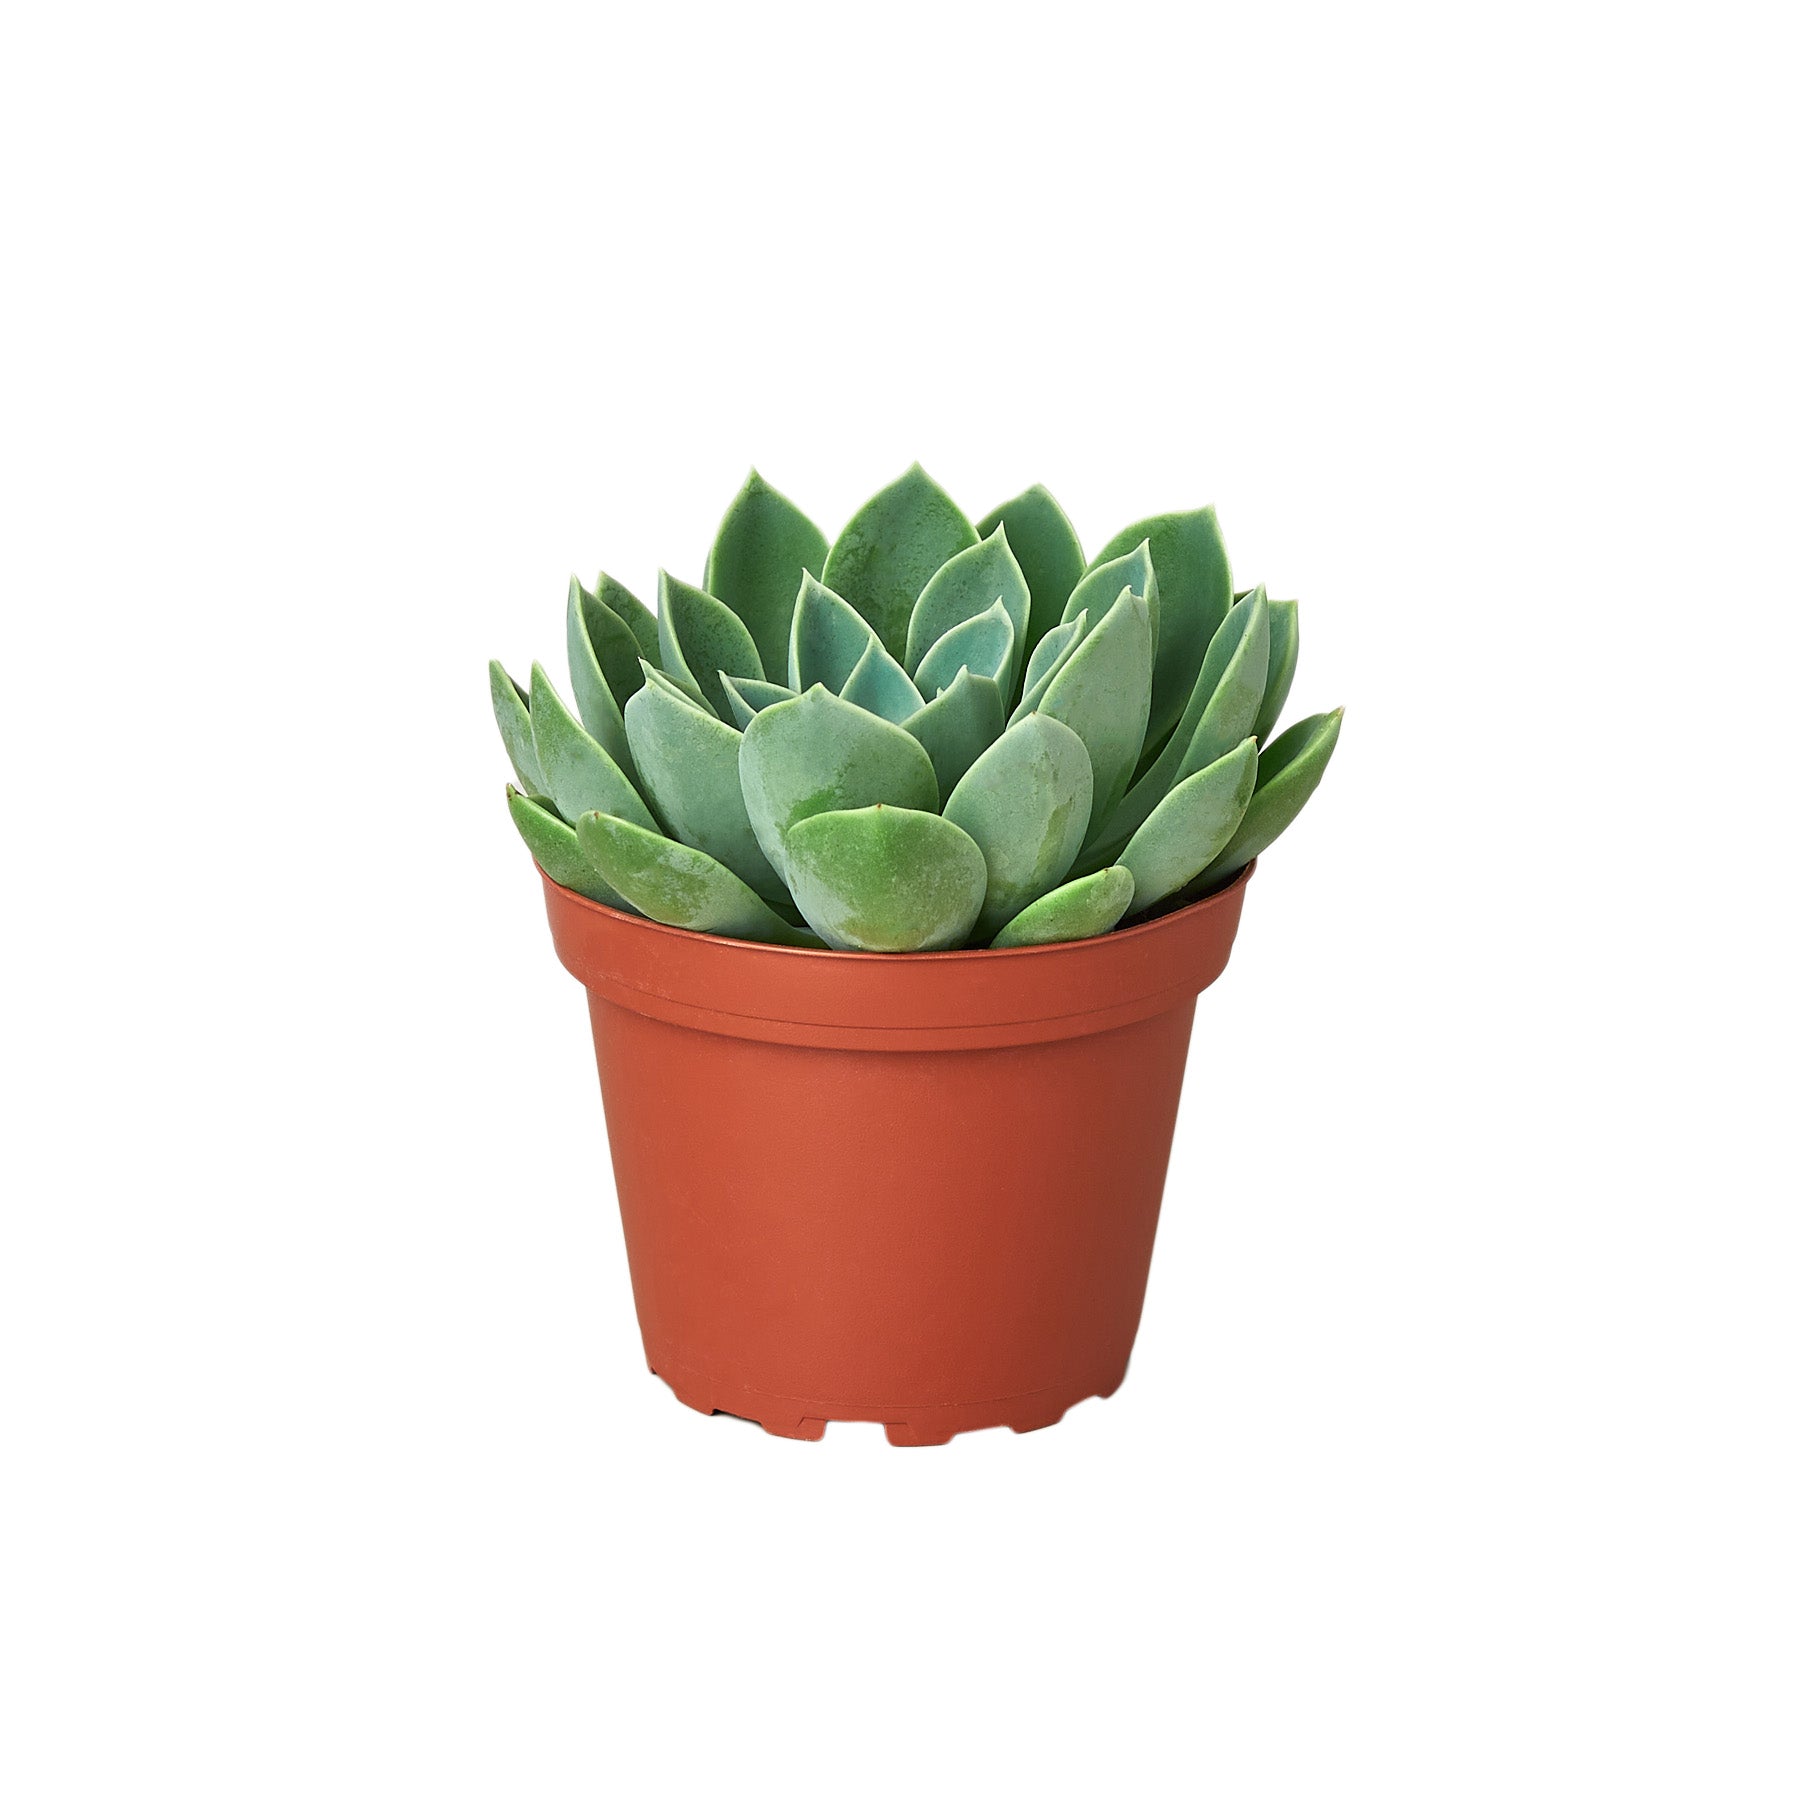 A succulent plant in a pot on a white background, available at the best garden nursery near me.